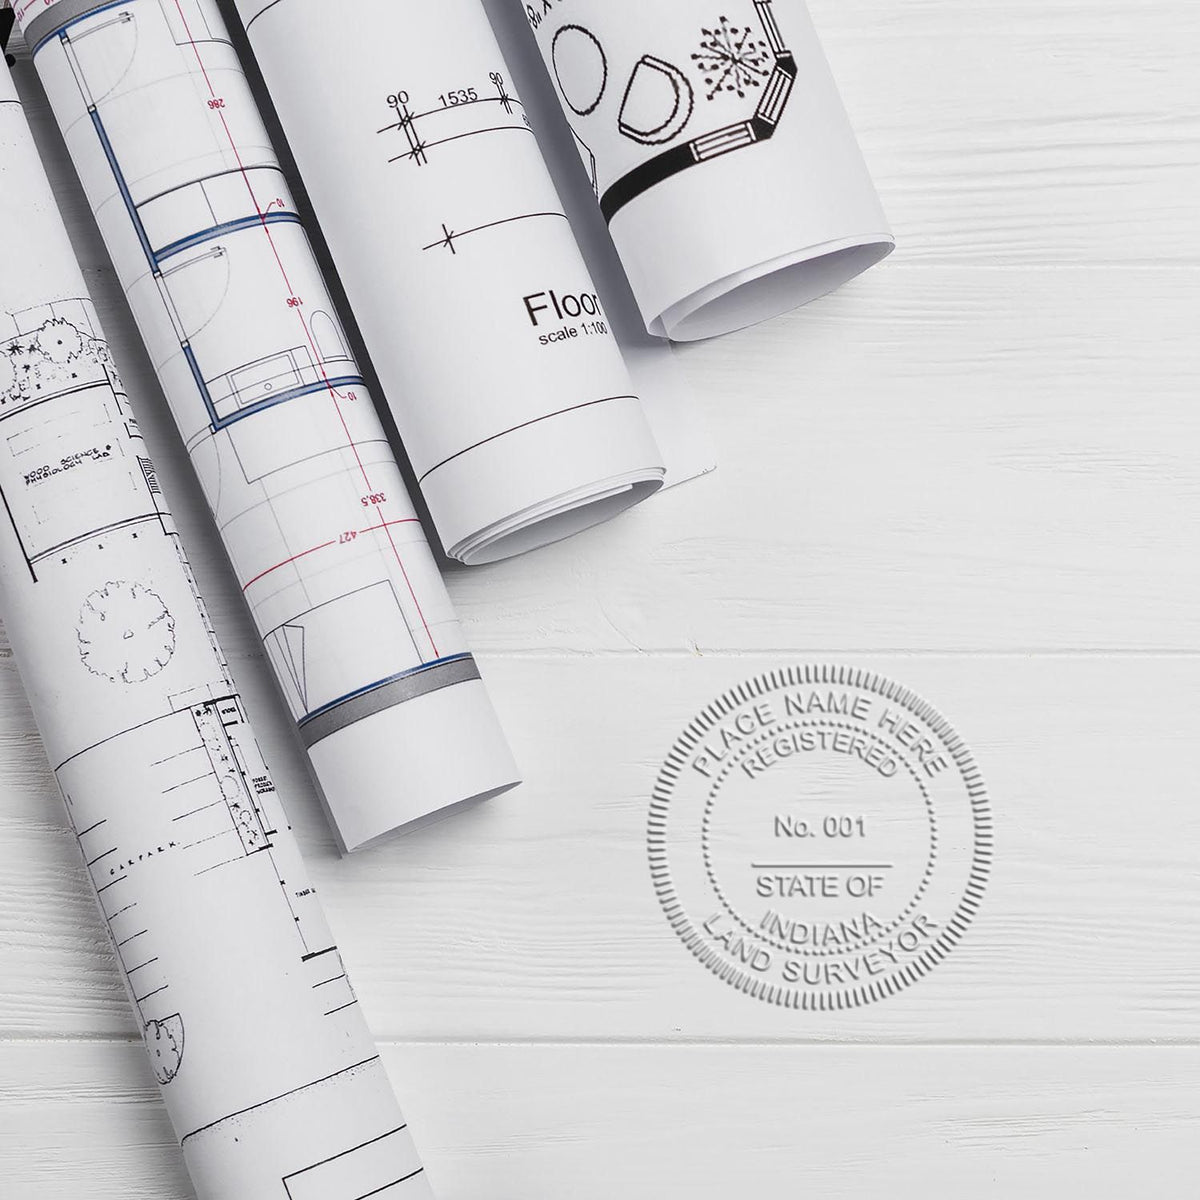 The Extended Long Reach Indiana Surveyor Embosser stamp impression comes to life with a crisp, detailed photo on paper - showcasing true professional quality.